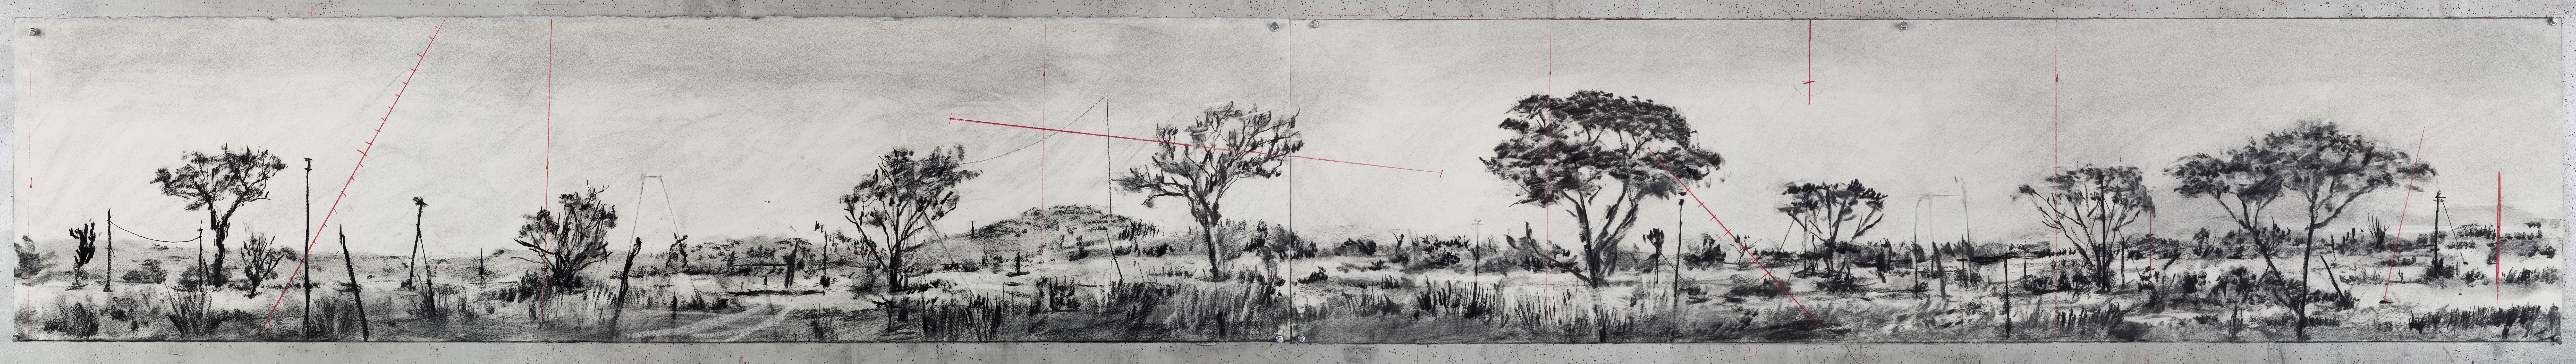 Drawing for The Head & the Load (Landscape with Trees)